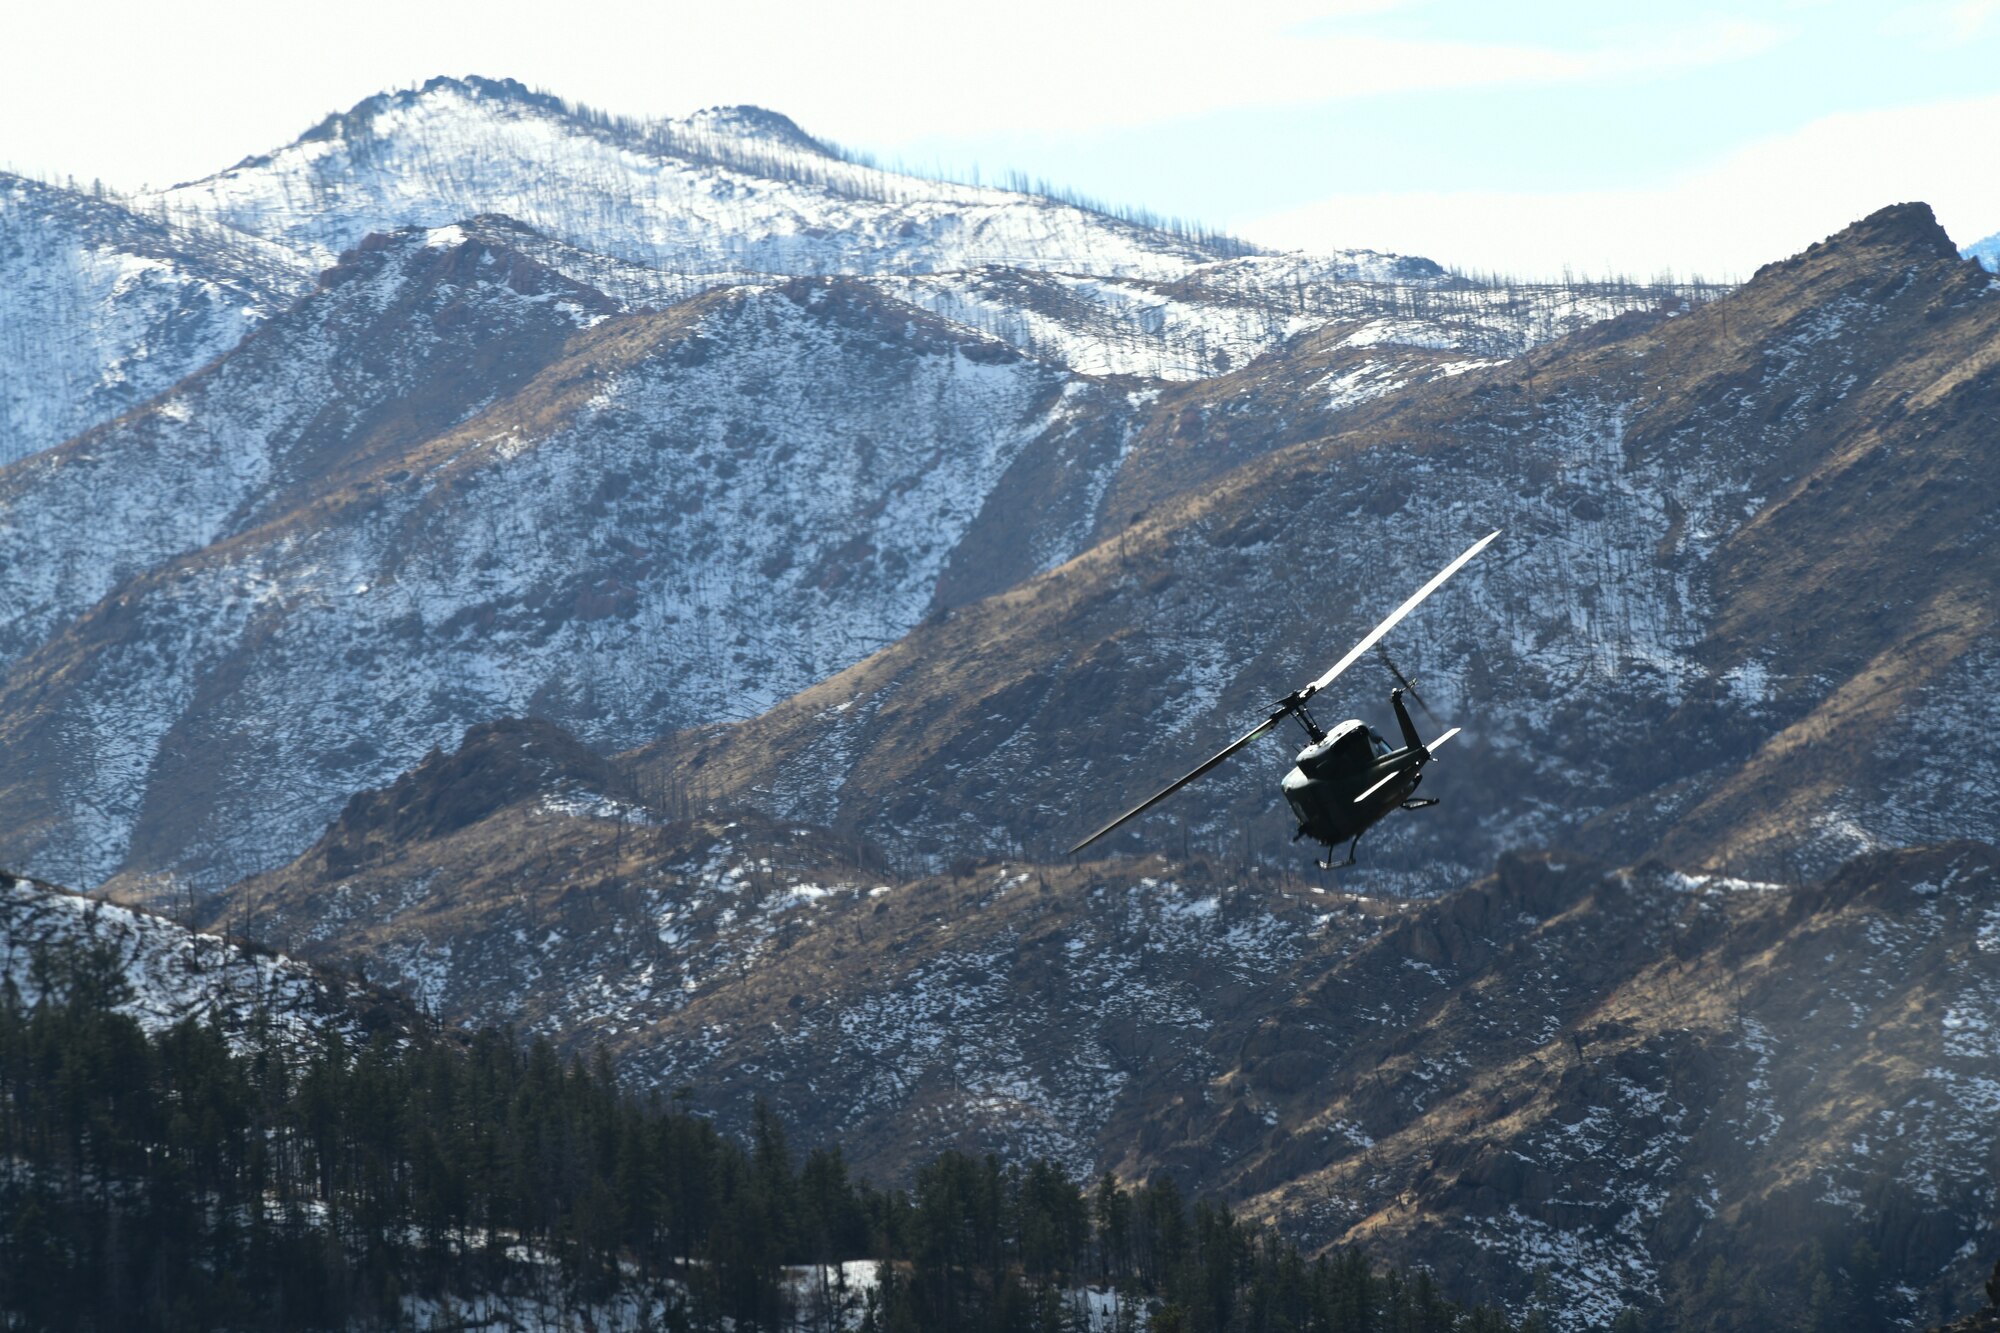 A 37th Helicopter Squadron helicopter flies through Poudre Canyon, Colorado, February 15, 2022. The 37 HS flies through many different types of terrain for training purposes in order to stay mission ready and lethal at all times. (U.S. Air Force photo by Airman Sarah Post)